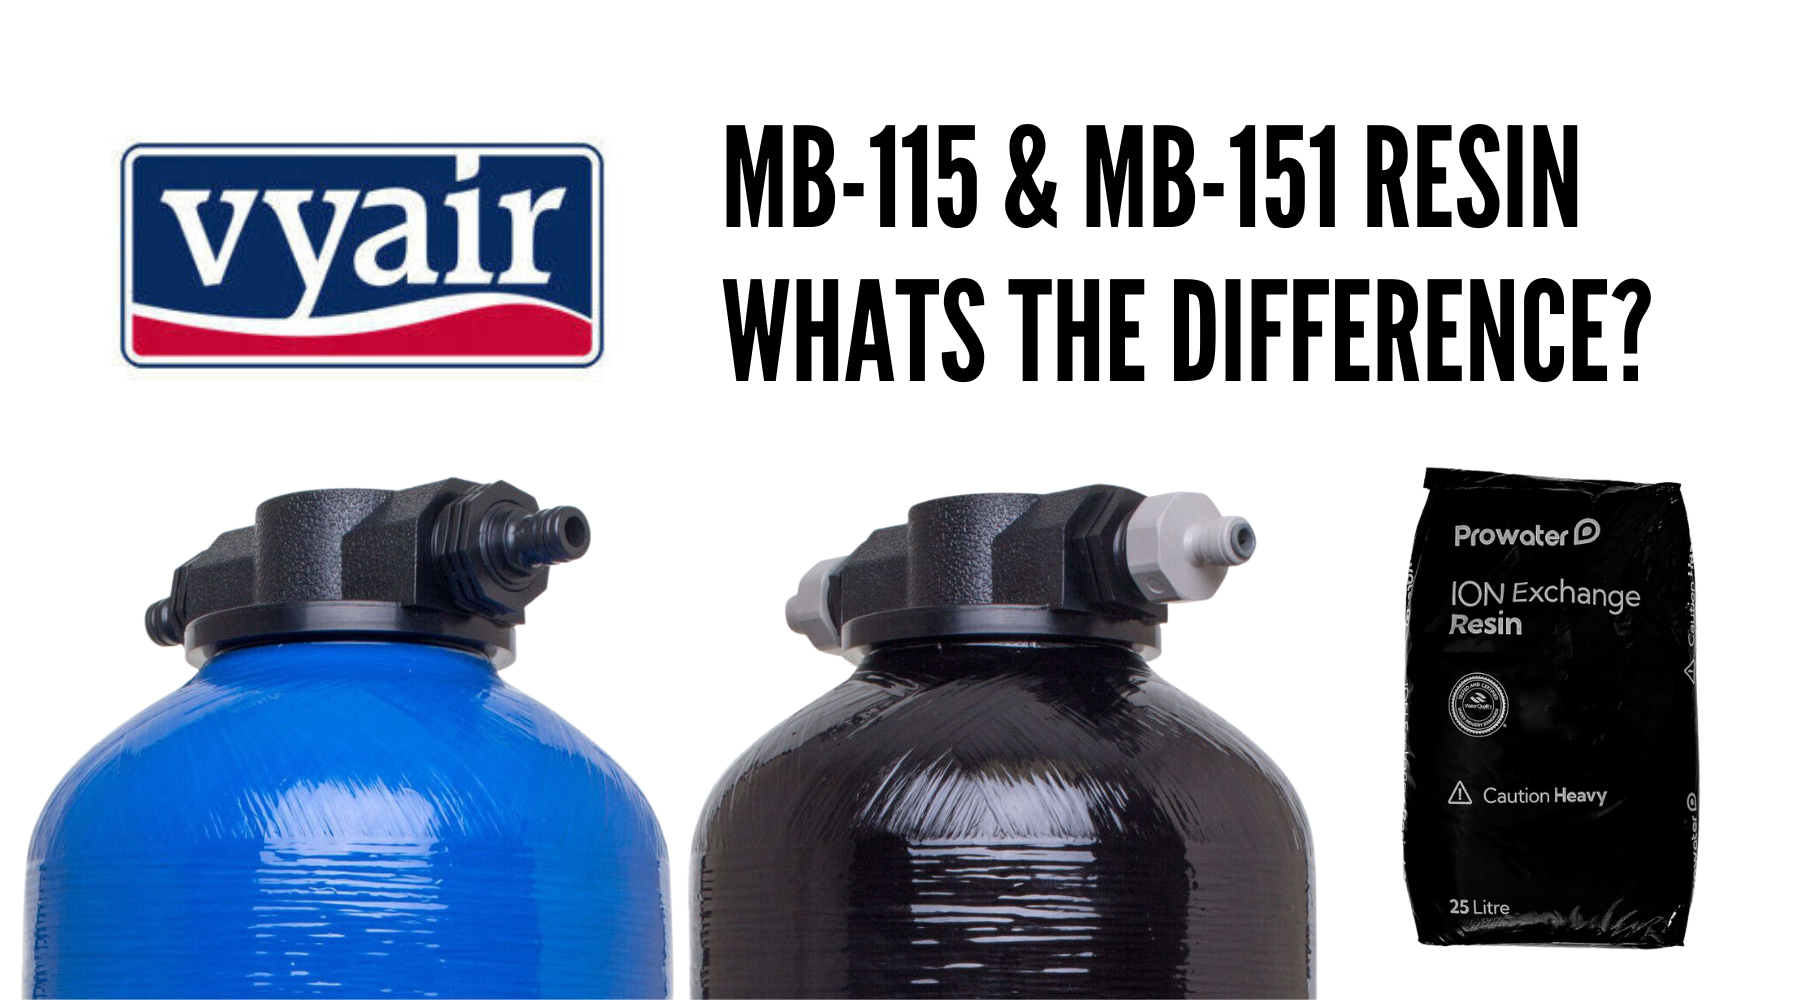 Deionising (DI) Resin MB-115 & MB-151 What's The Difference?